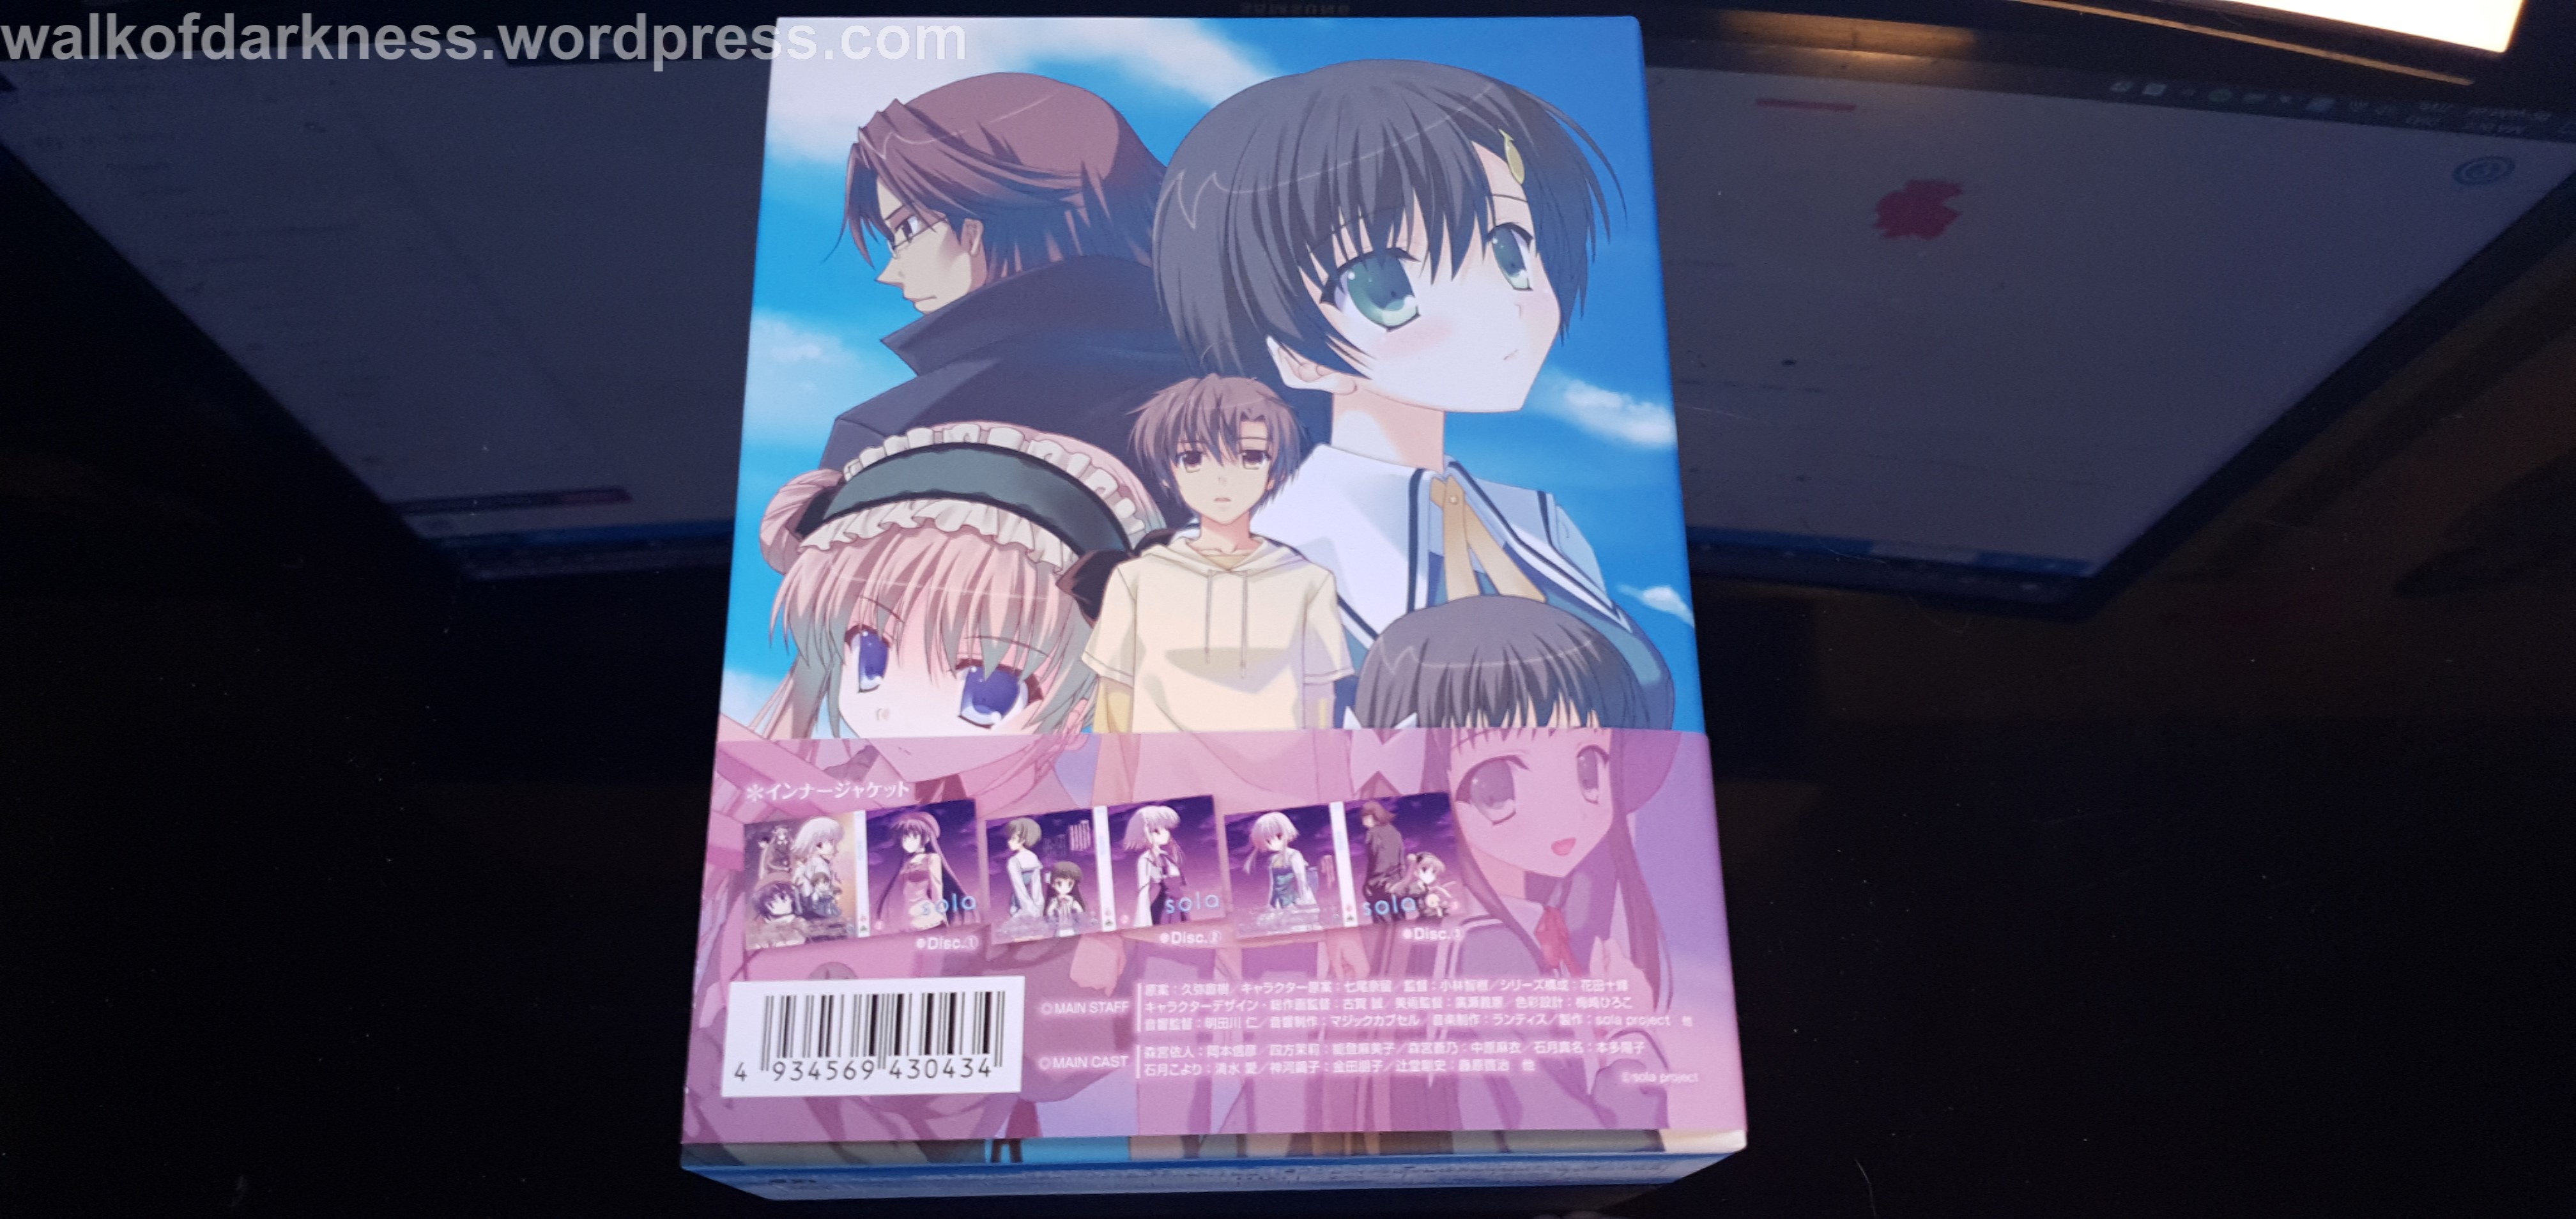 Unboxing Sola Jp Limited Edition Blu Ray Box Import Anime Exclusive Version Walk Of Darkness